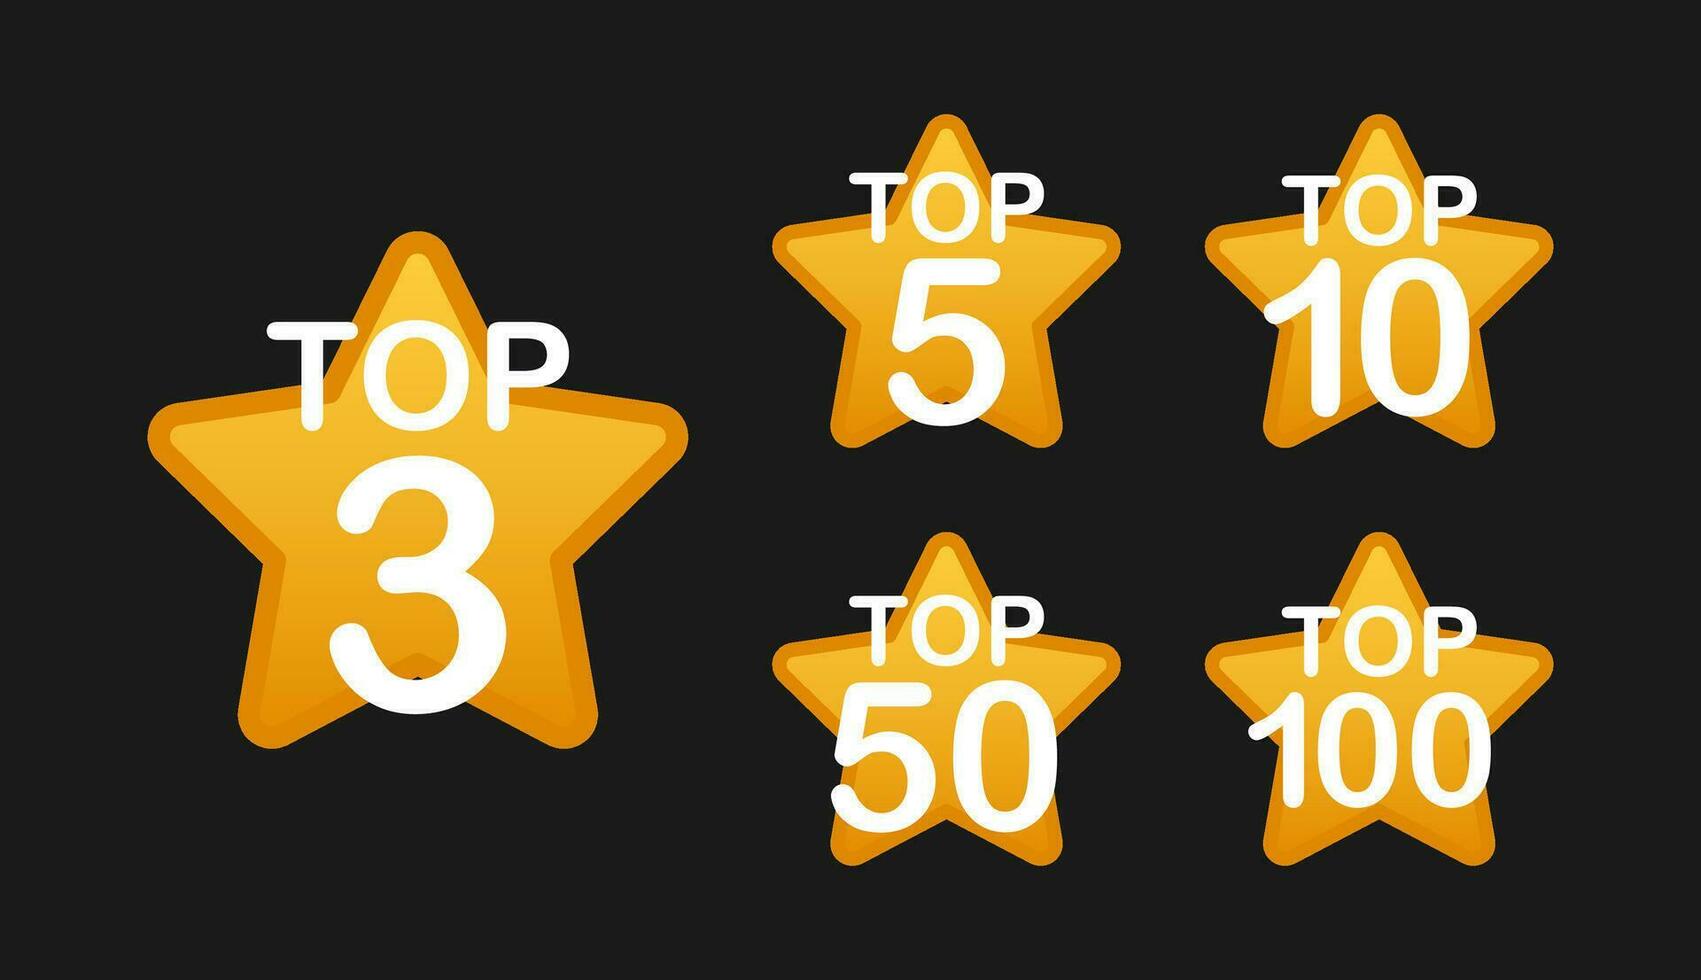 Top 3, 5, 10, 20, 50, 100 rating chart. Best in the ranking. vector